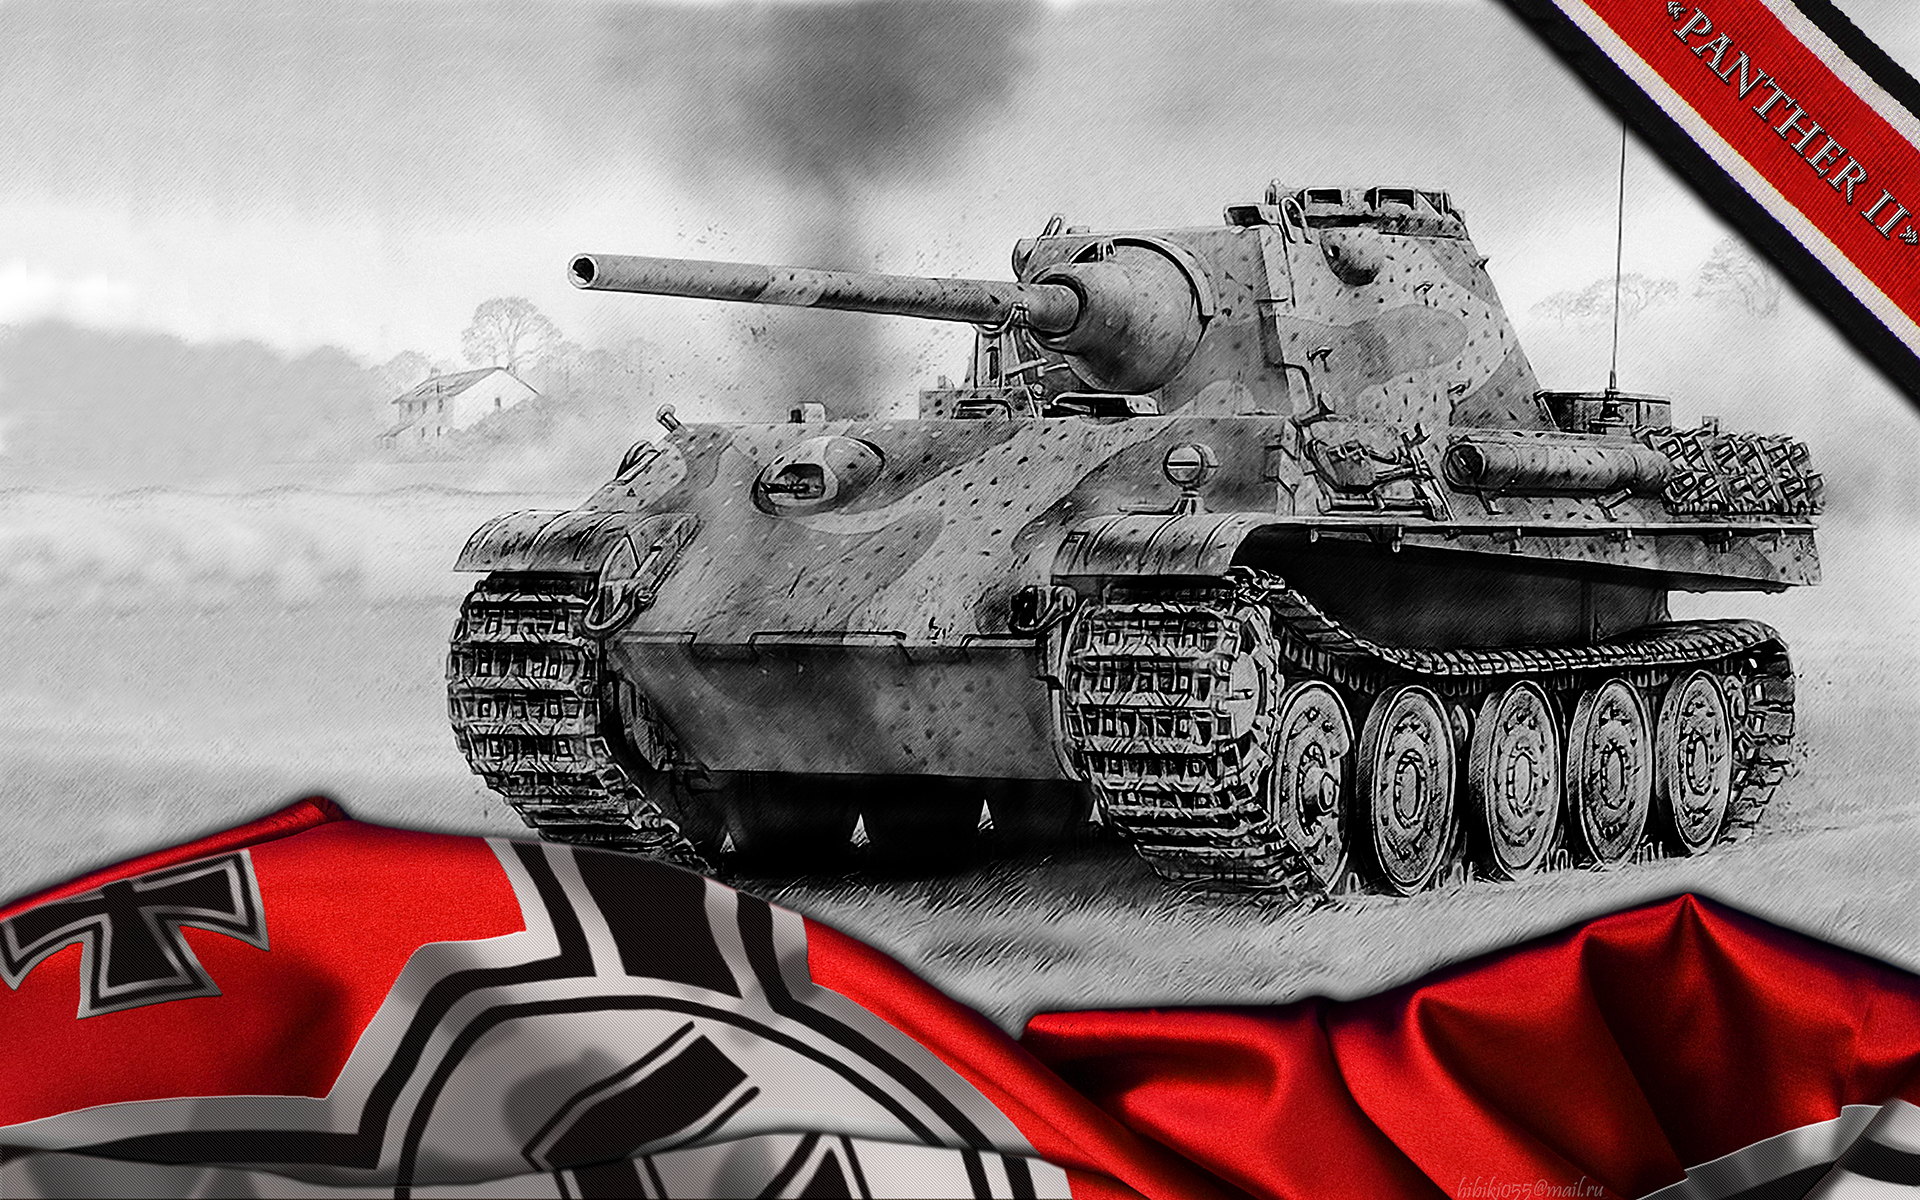  World Of Tanks Cellphone FHD pic